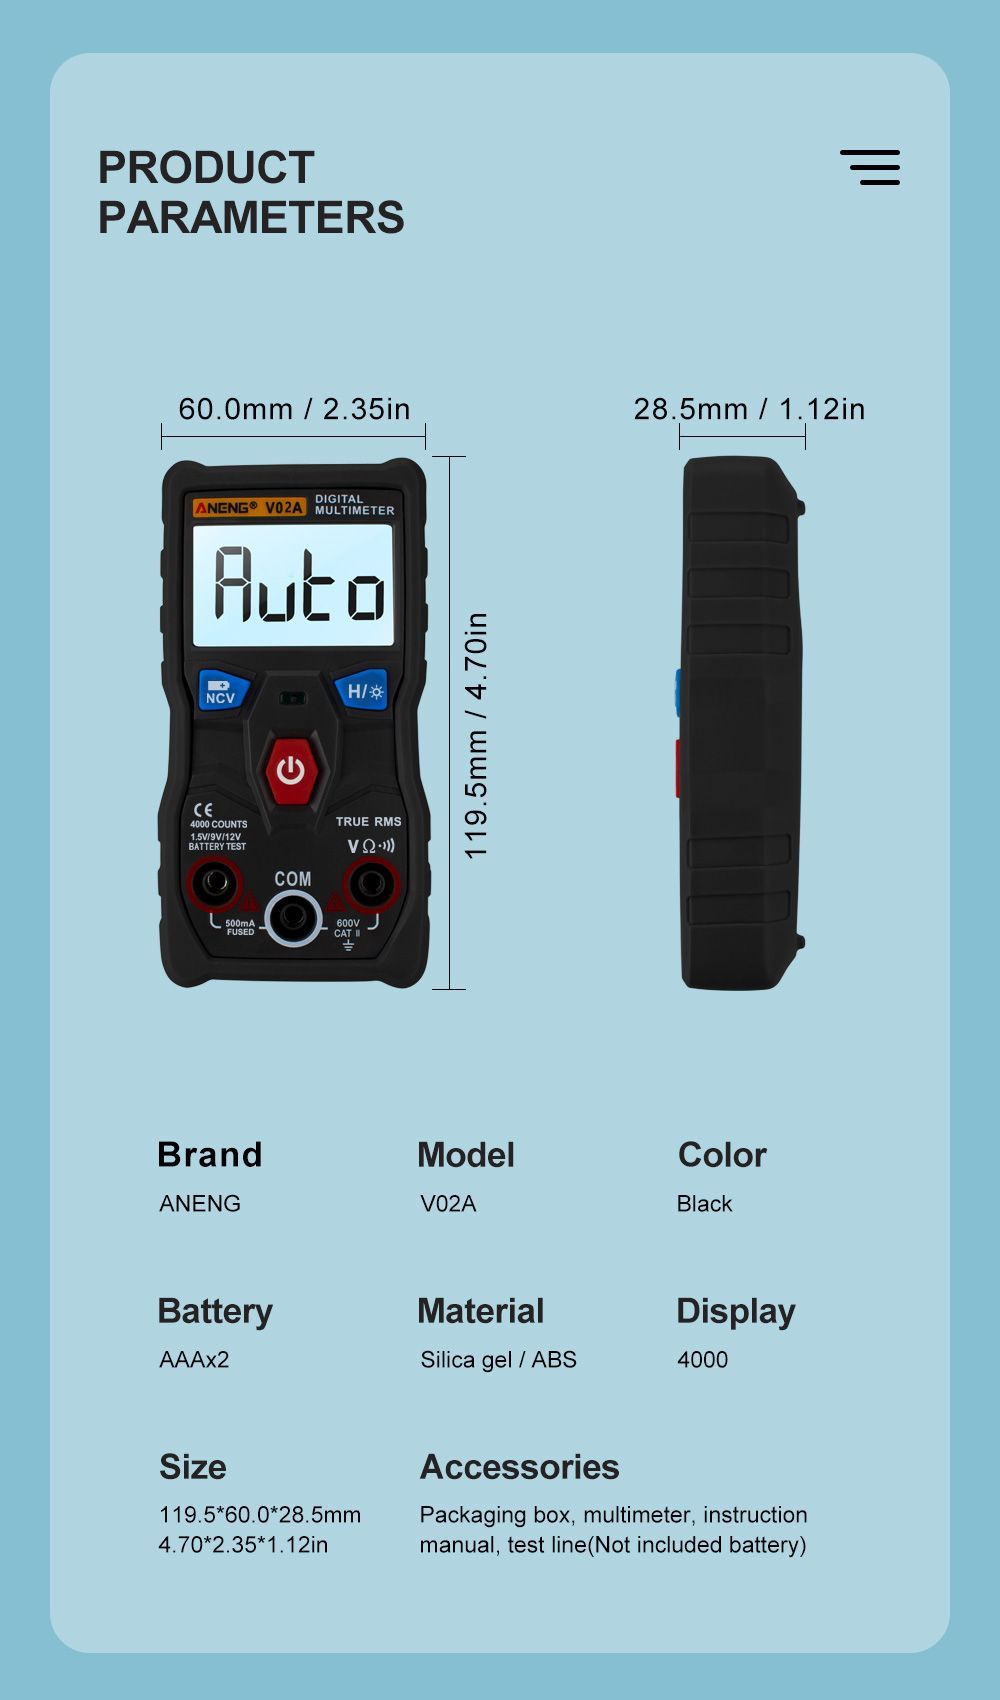 ANENG-V02A-Automatic-Intelligent-Gear-Recognition-Electrician-NCV-Pocket-True-RMS-Digital-Multimeter-1474251